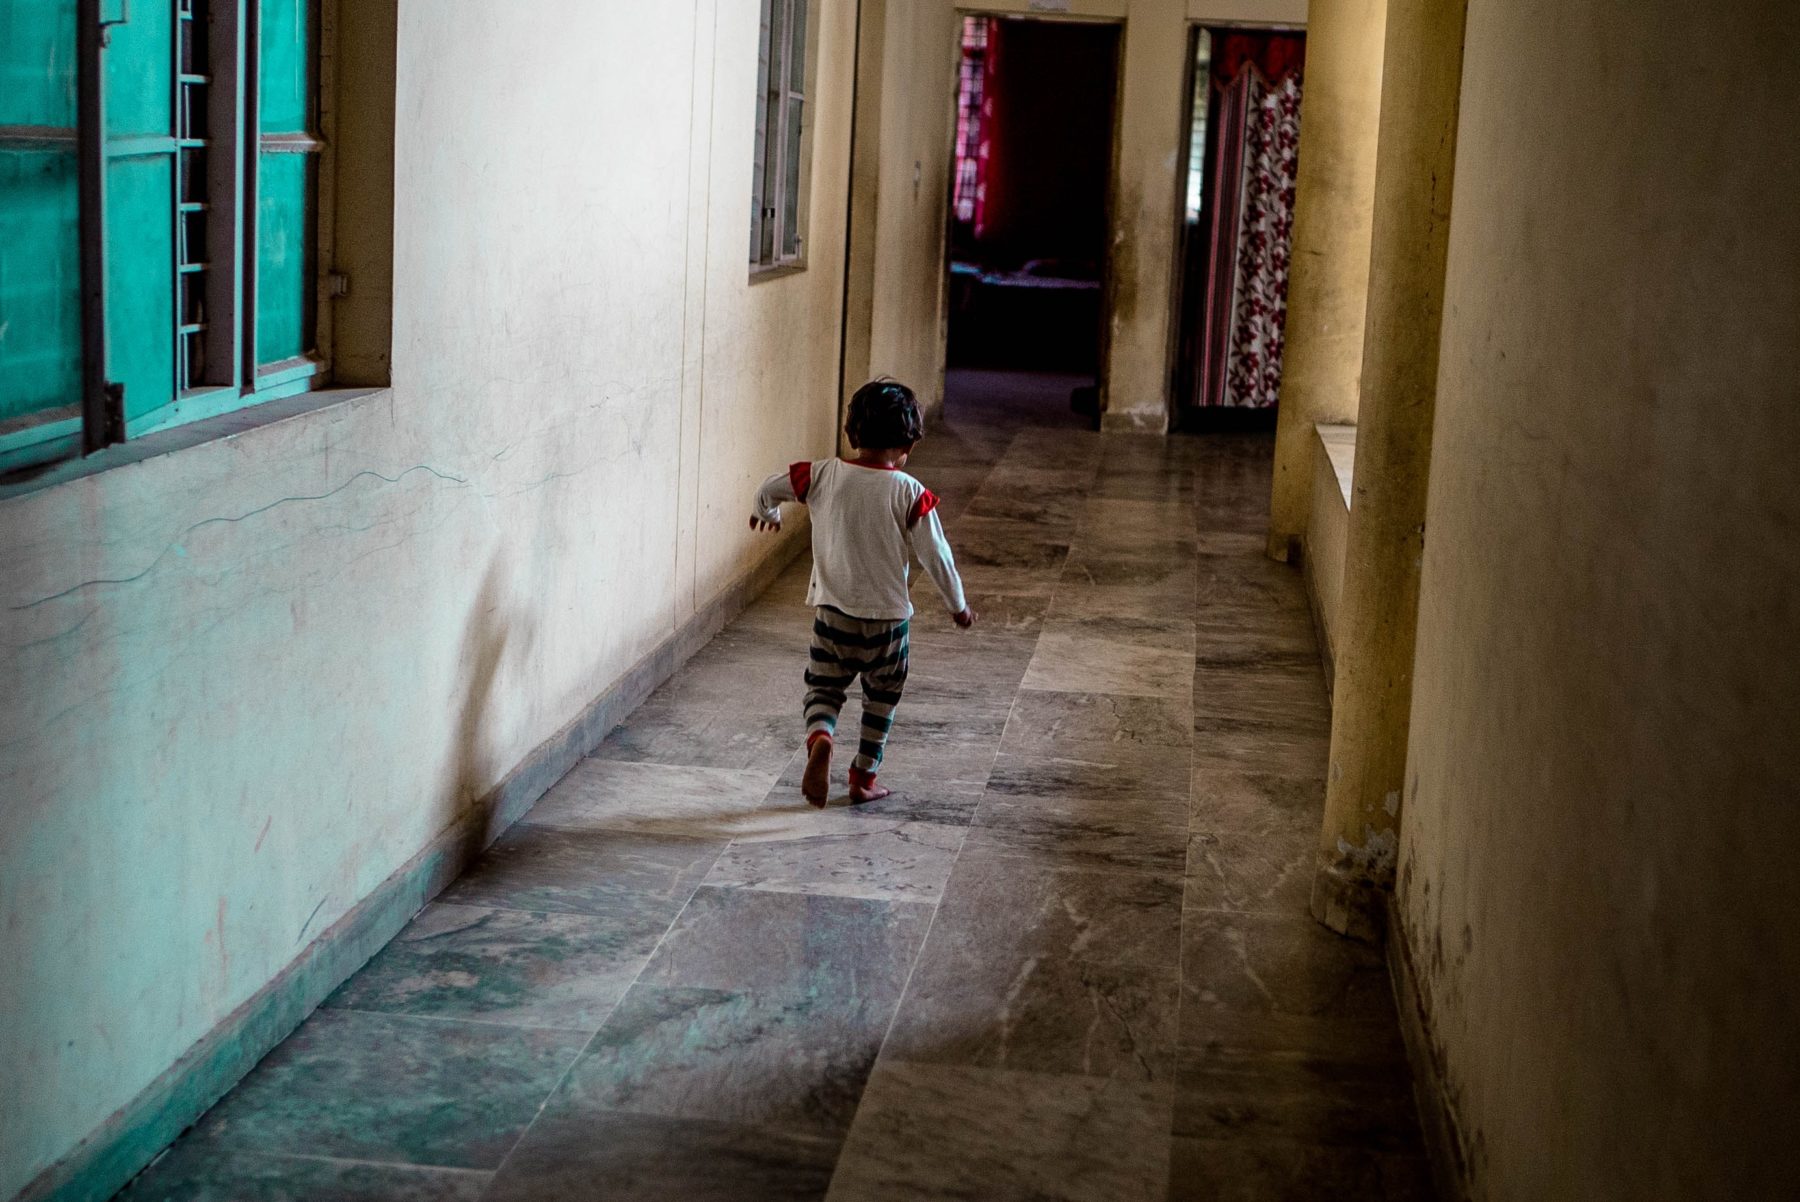 A young child wandering down a corridor.